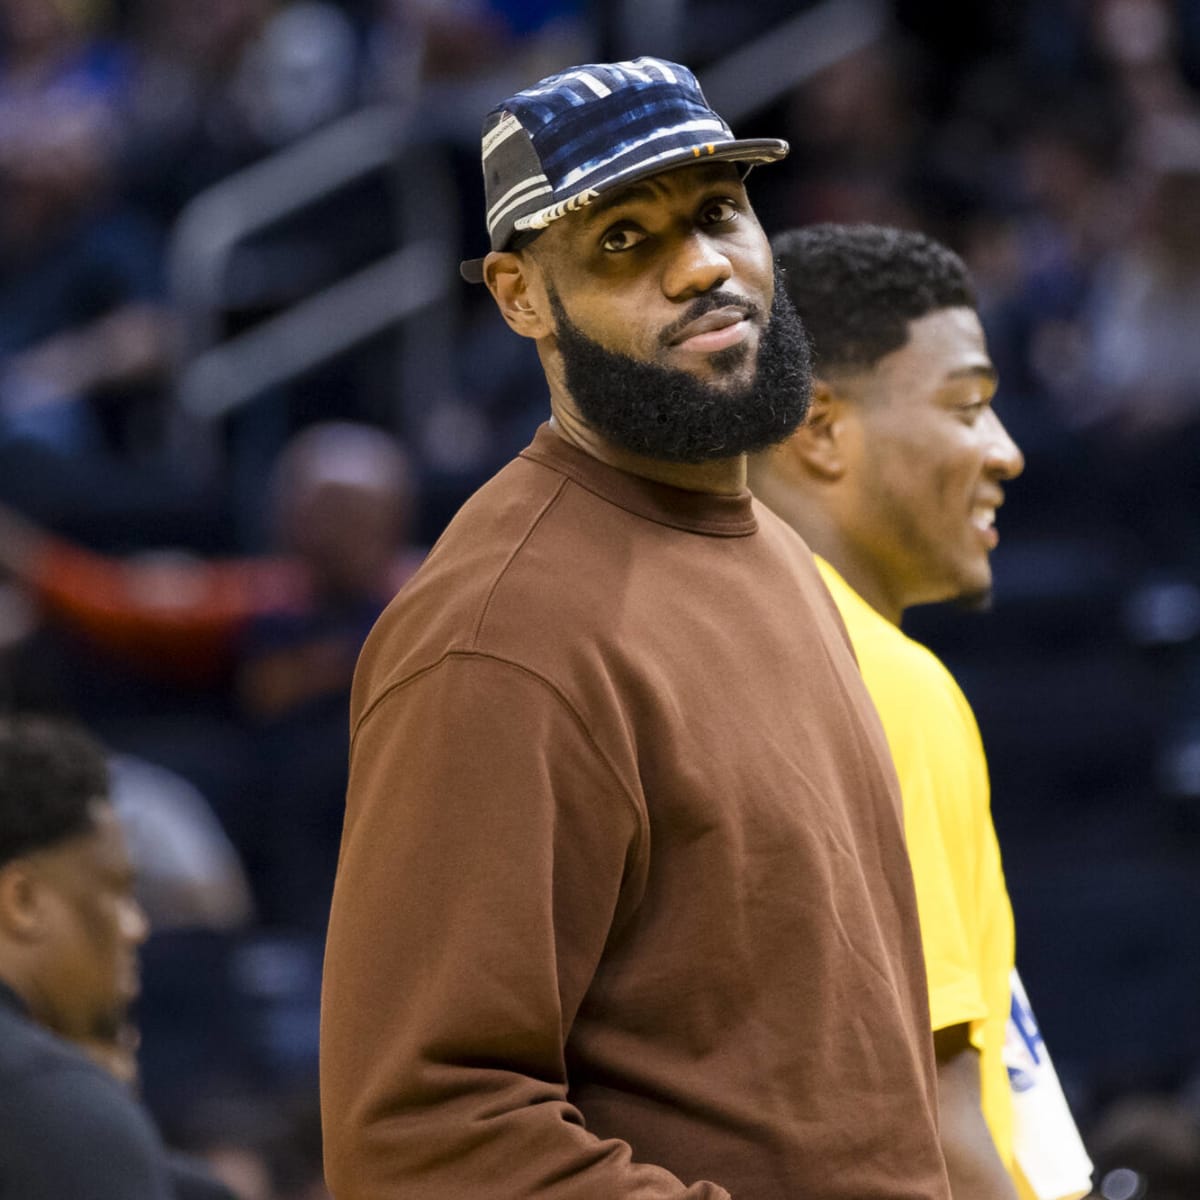 LeBron James expresses interest in owning NBA franchise in Las Vegas